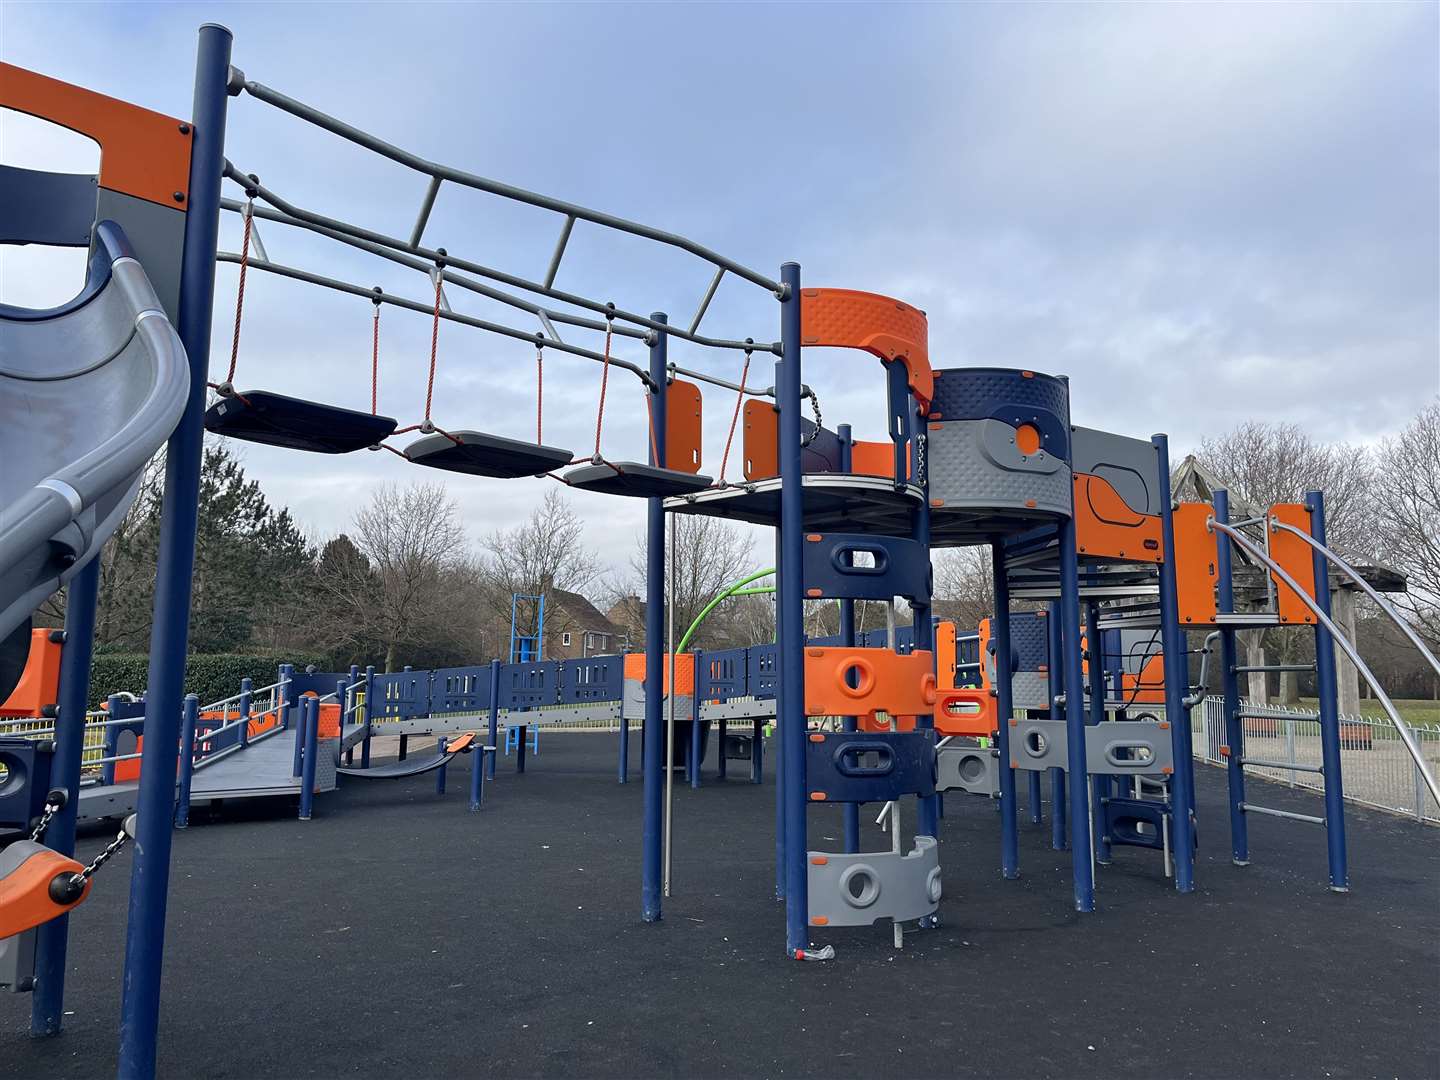 The new play area in Park Farm opened in November